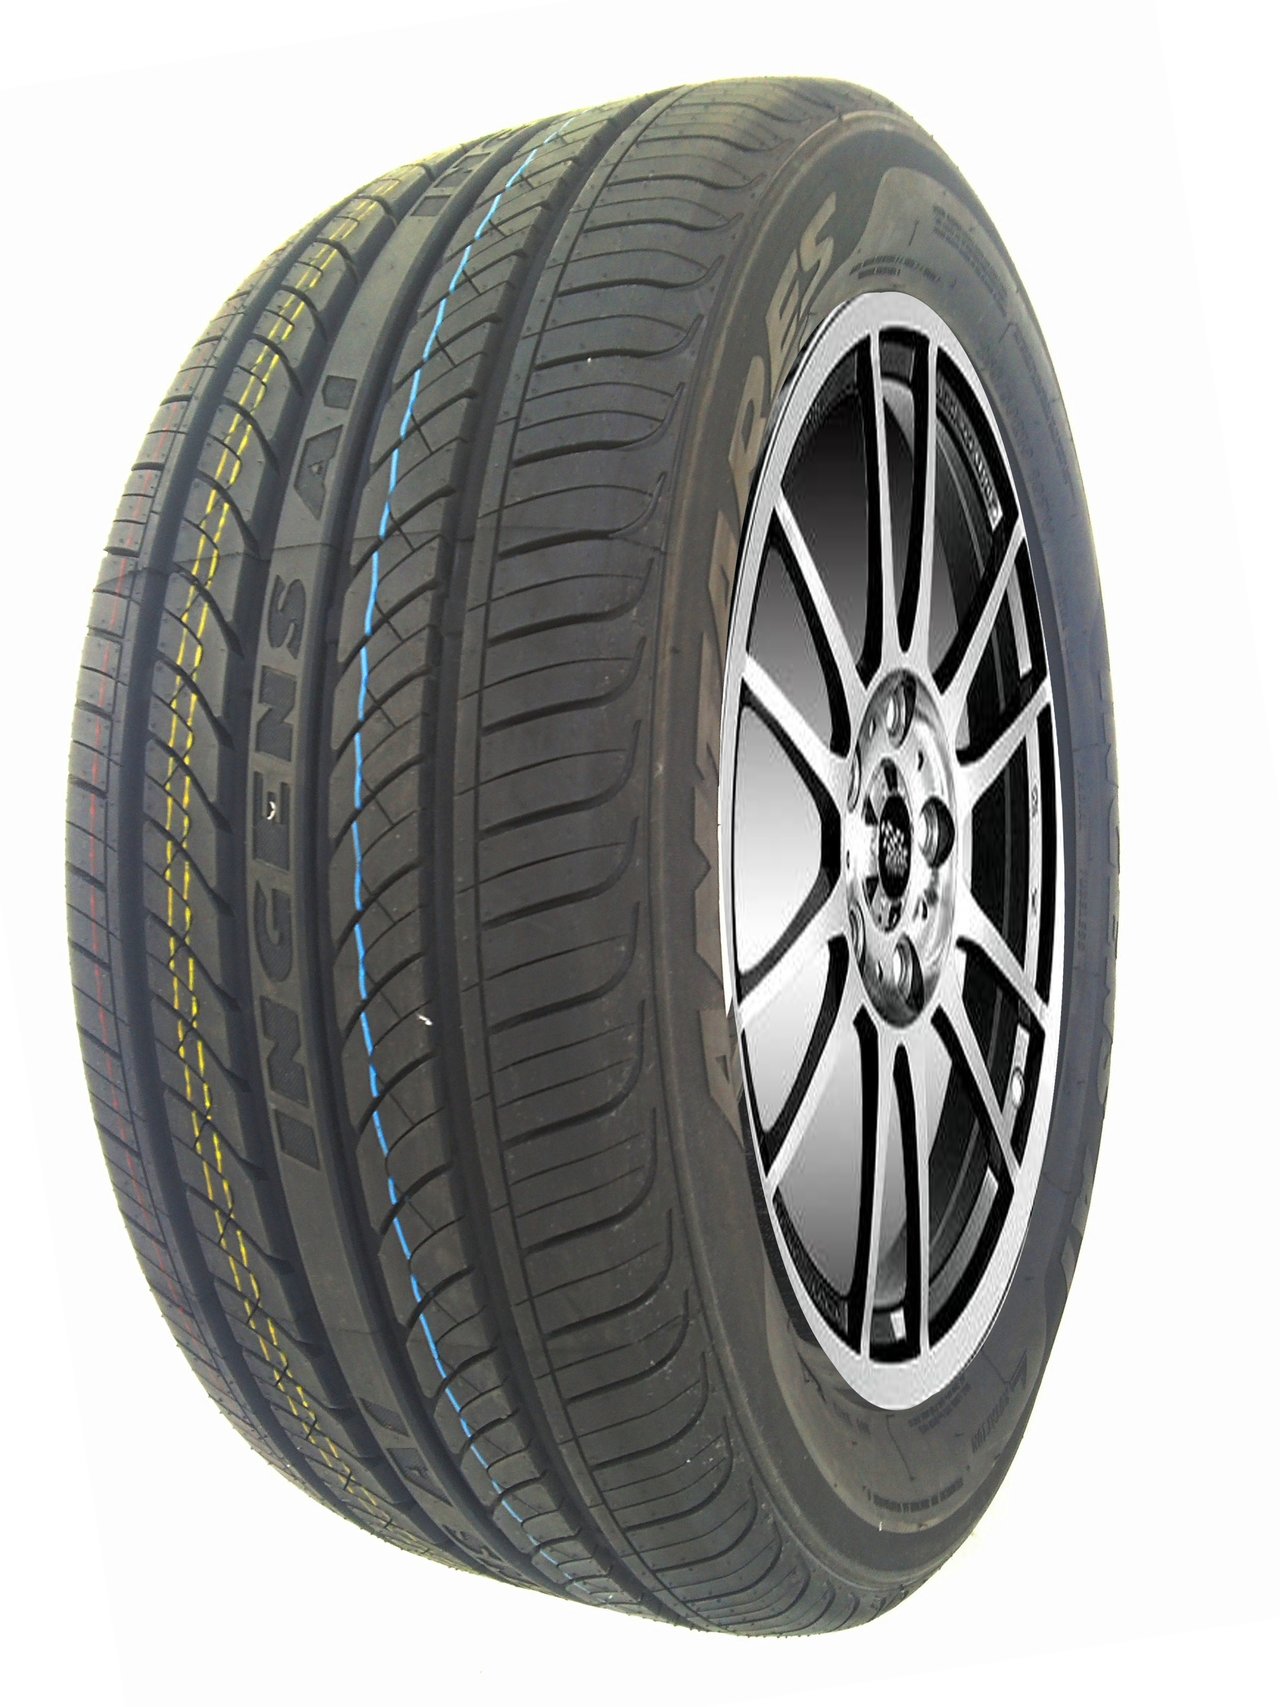 Antares Ingens A1 185/65R15 88H TL M+S